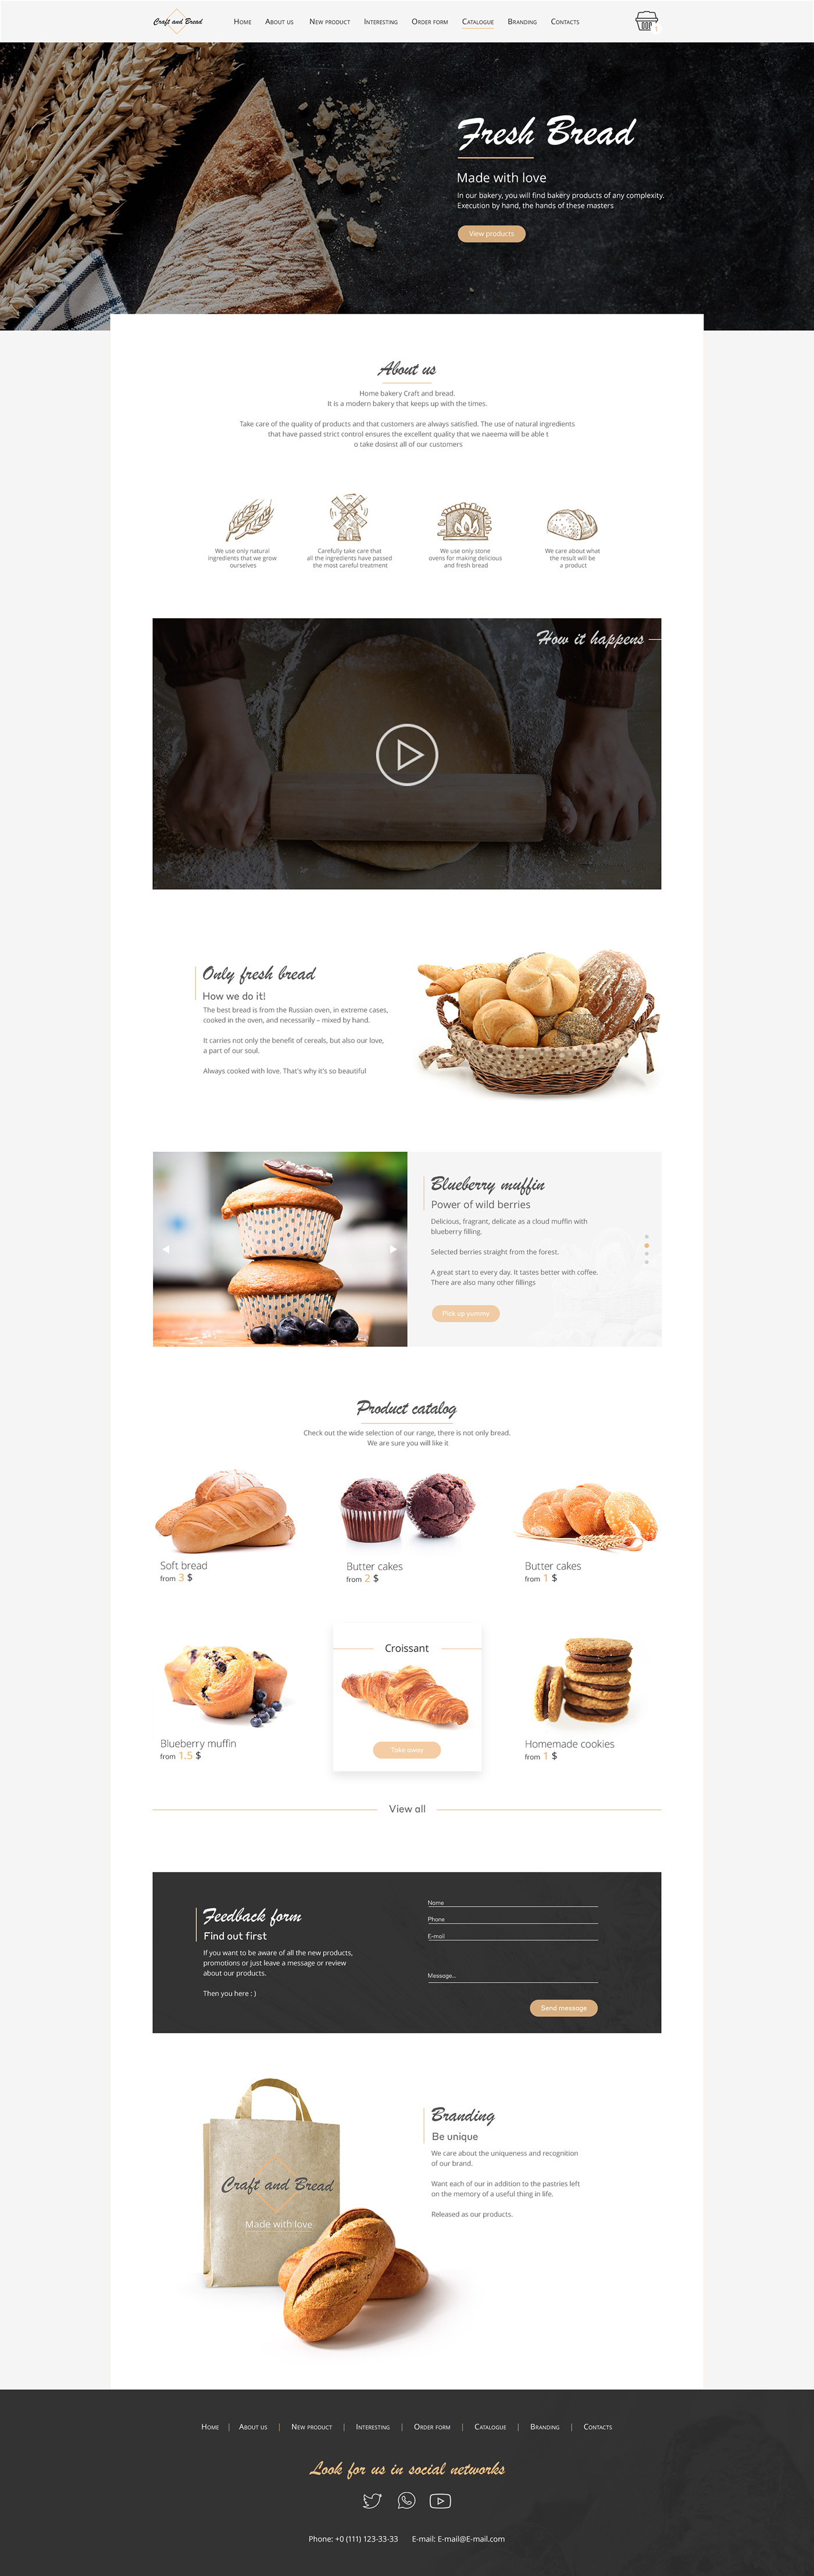 landing page Interface craft bakery web site interaction product design  online store brand identity visual identity